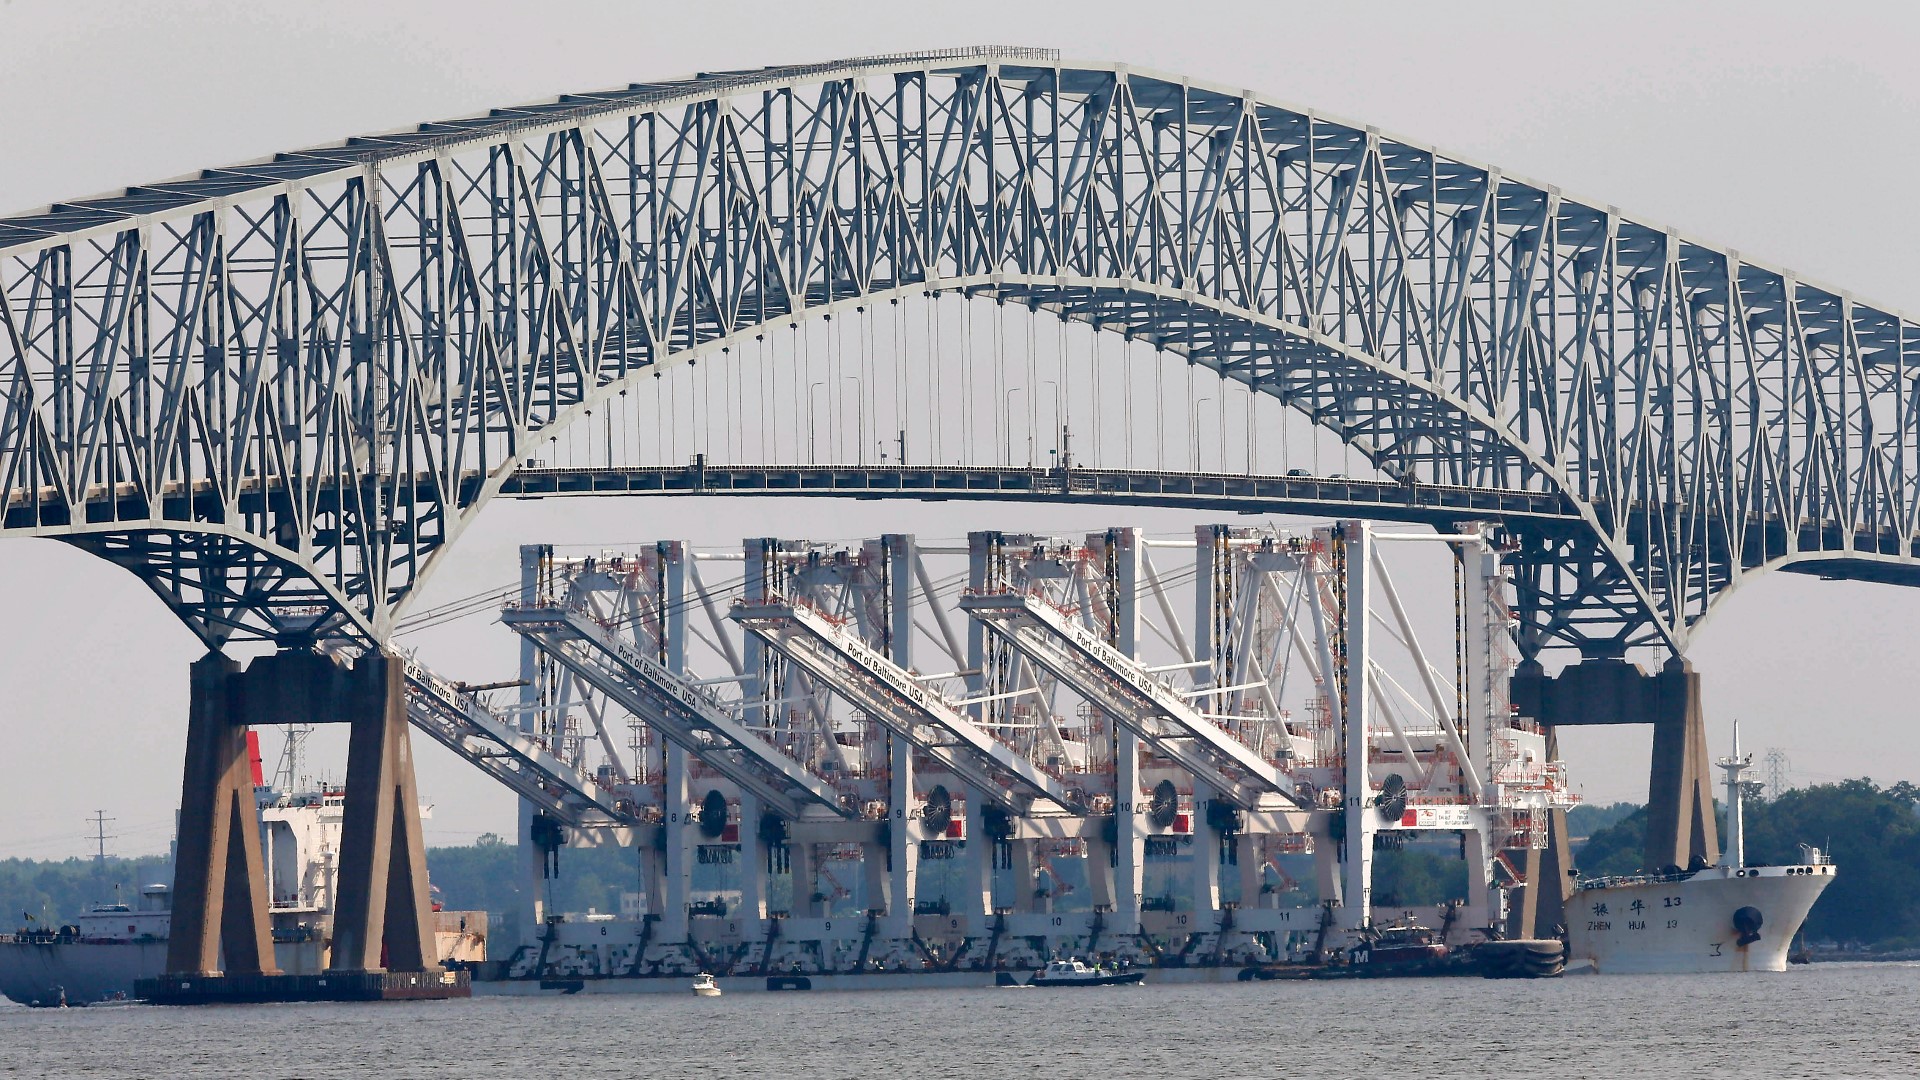 The bridge, which opened to the public in 1977, collapse early Tuesday morning when a ship hit it.